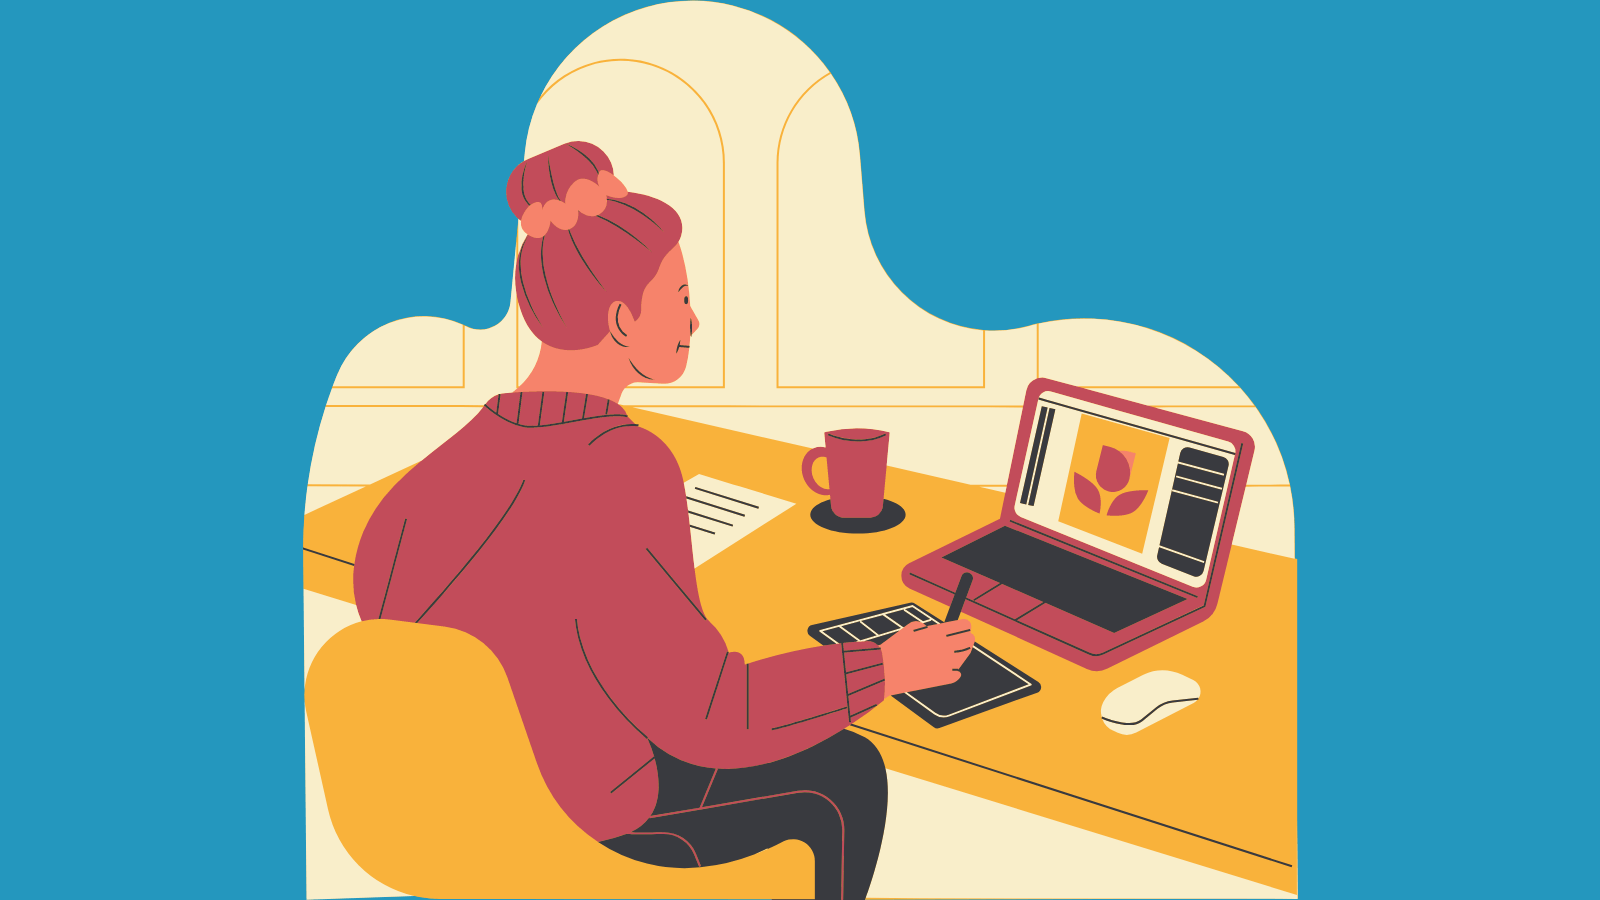 An illustration of a person using a computer